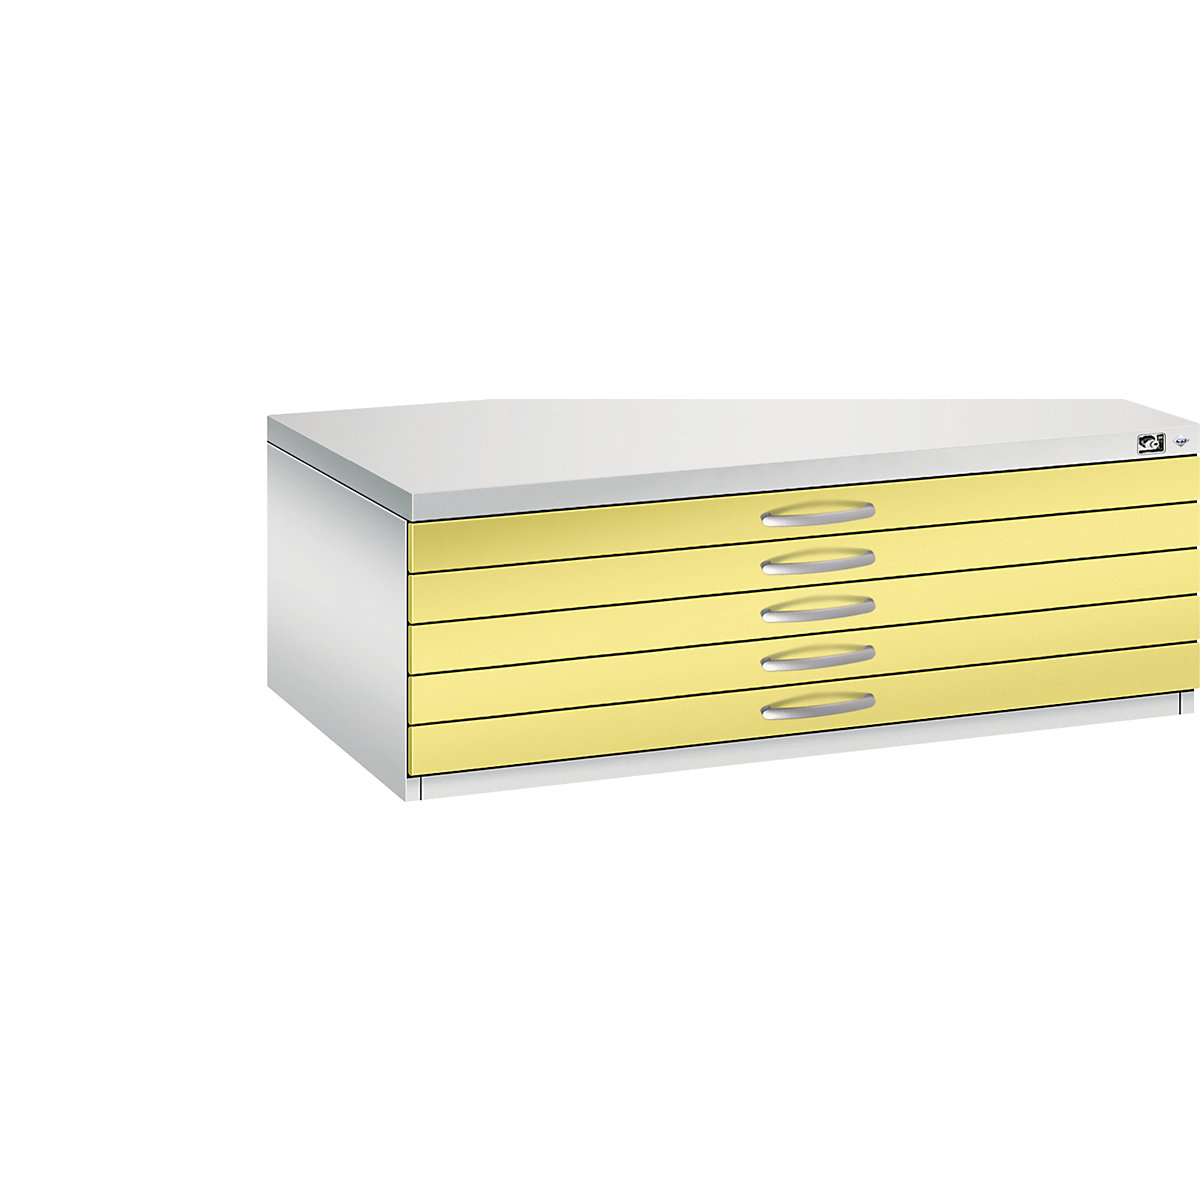 Drawing cabinet – C+P, A1, 5 drawers, height 420 mm, light grey / sulphur yellow-11